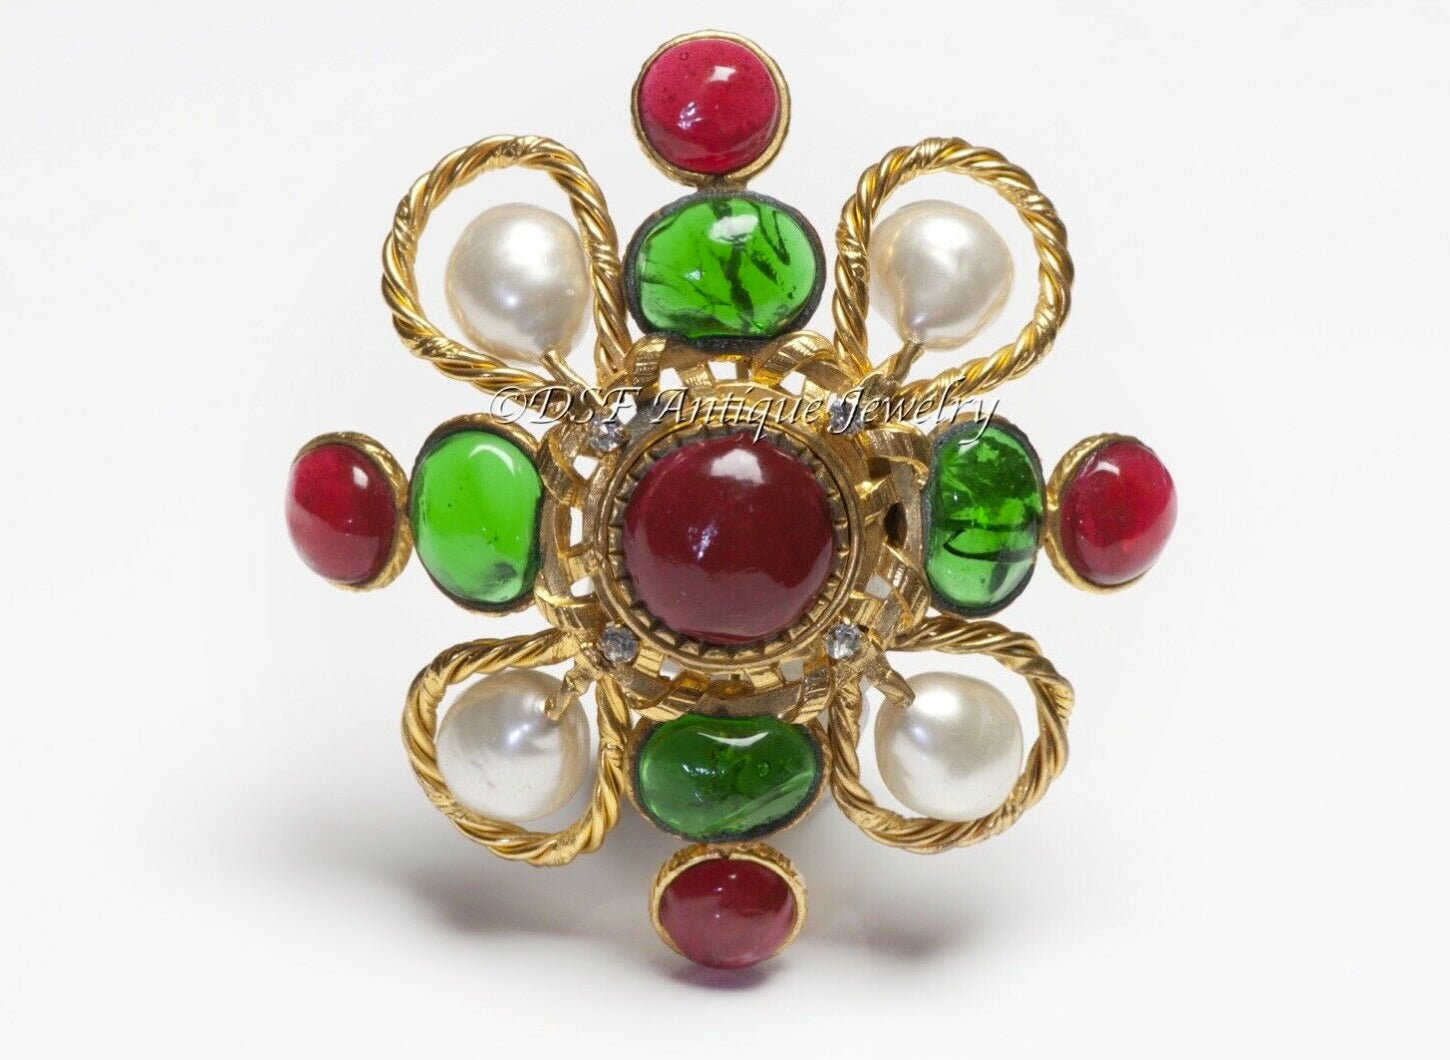 CHANEL Paris 1980’s Maison Gripoix Red Green Glass Faux Pearl Pendant Brooch - DSF Antique Jewelry